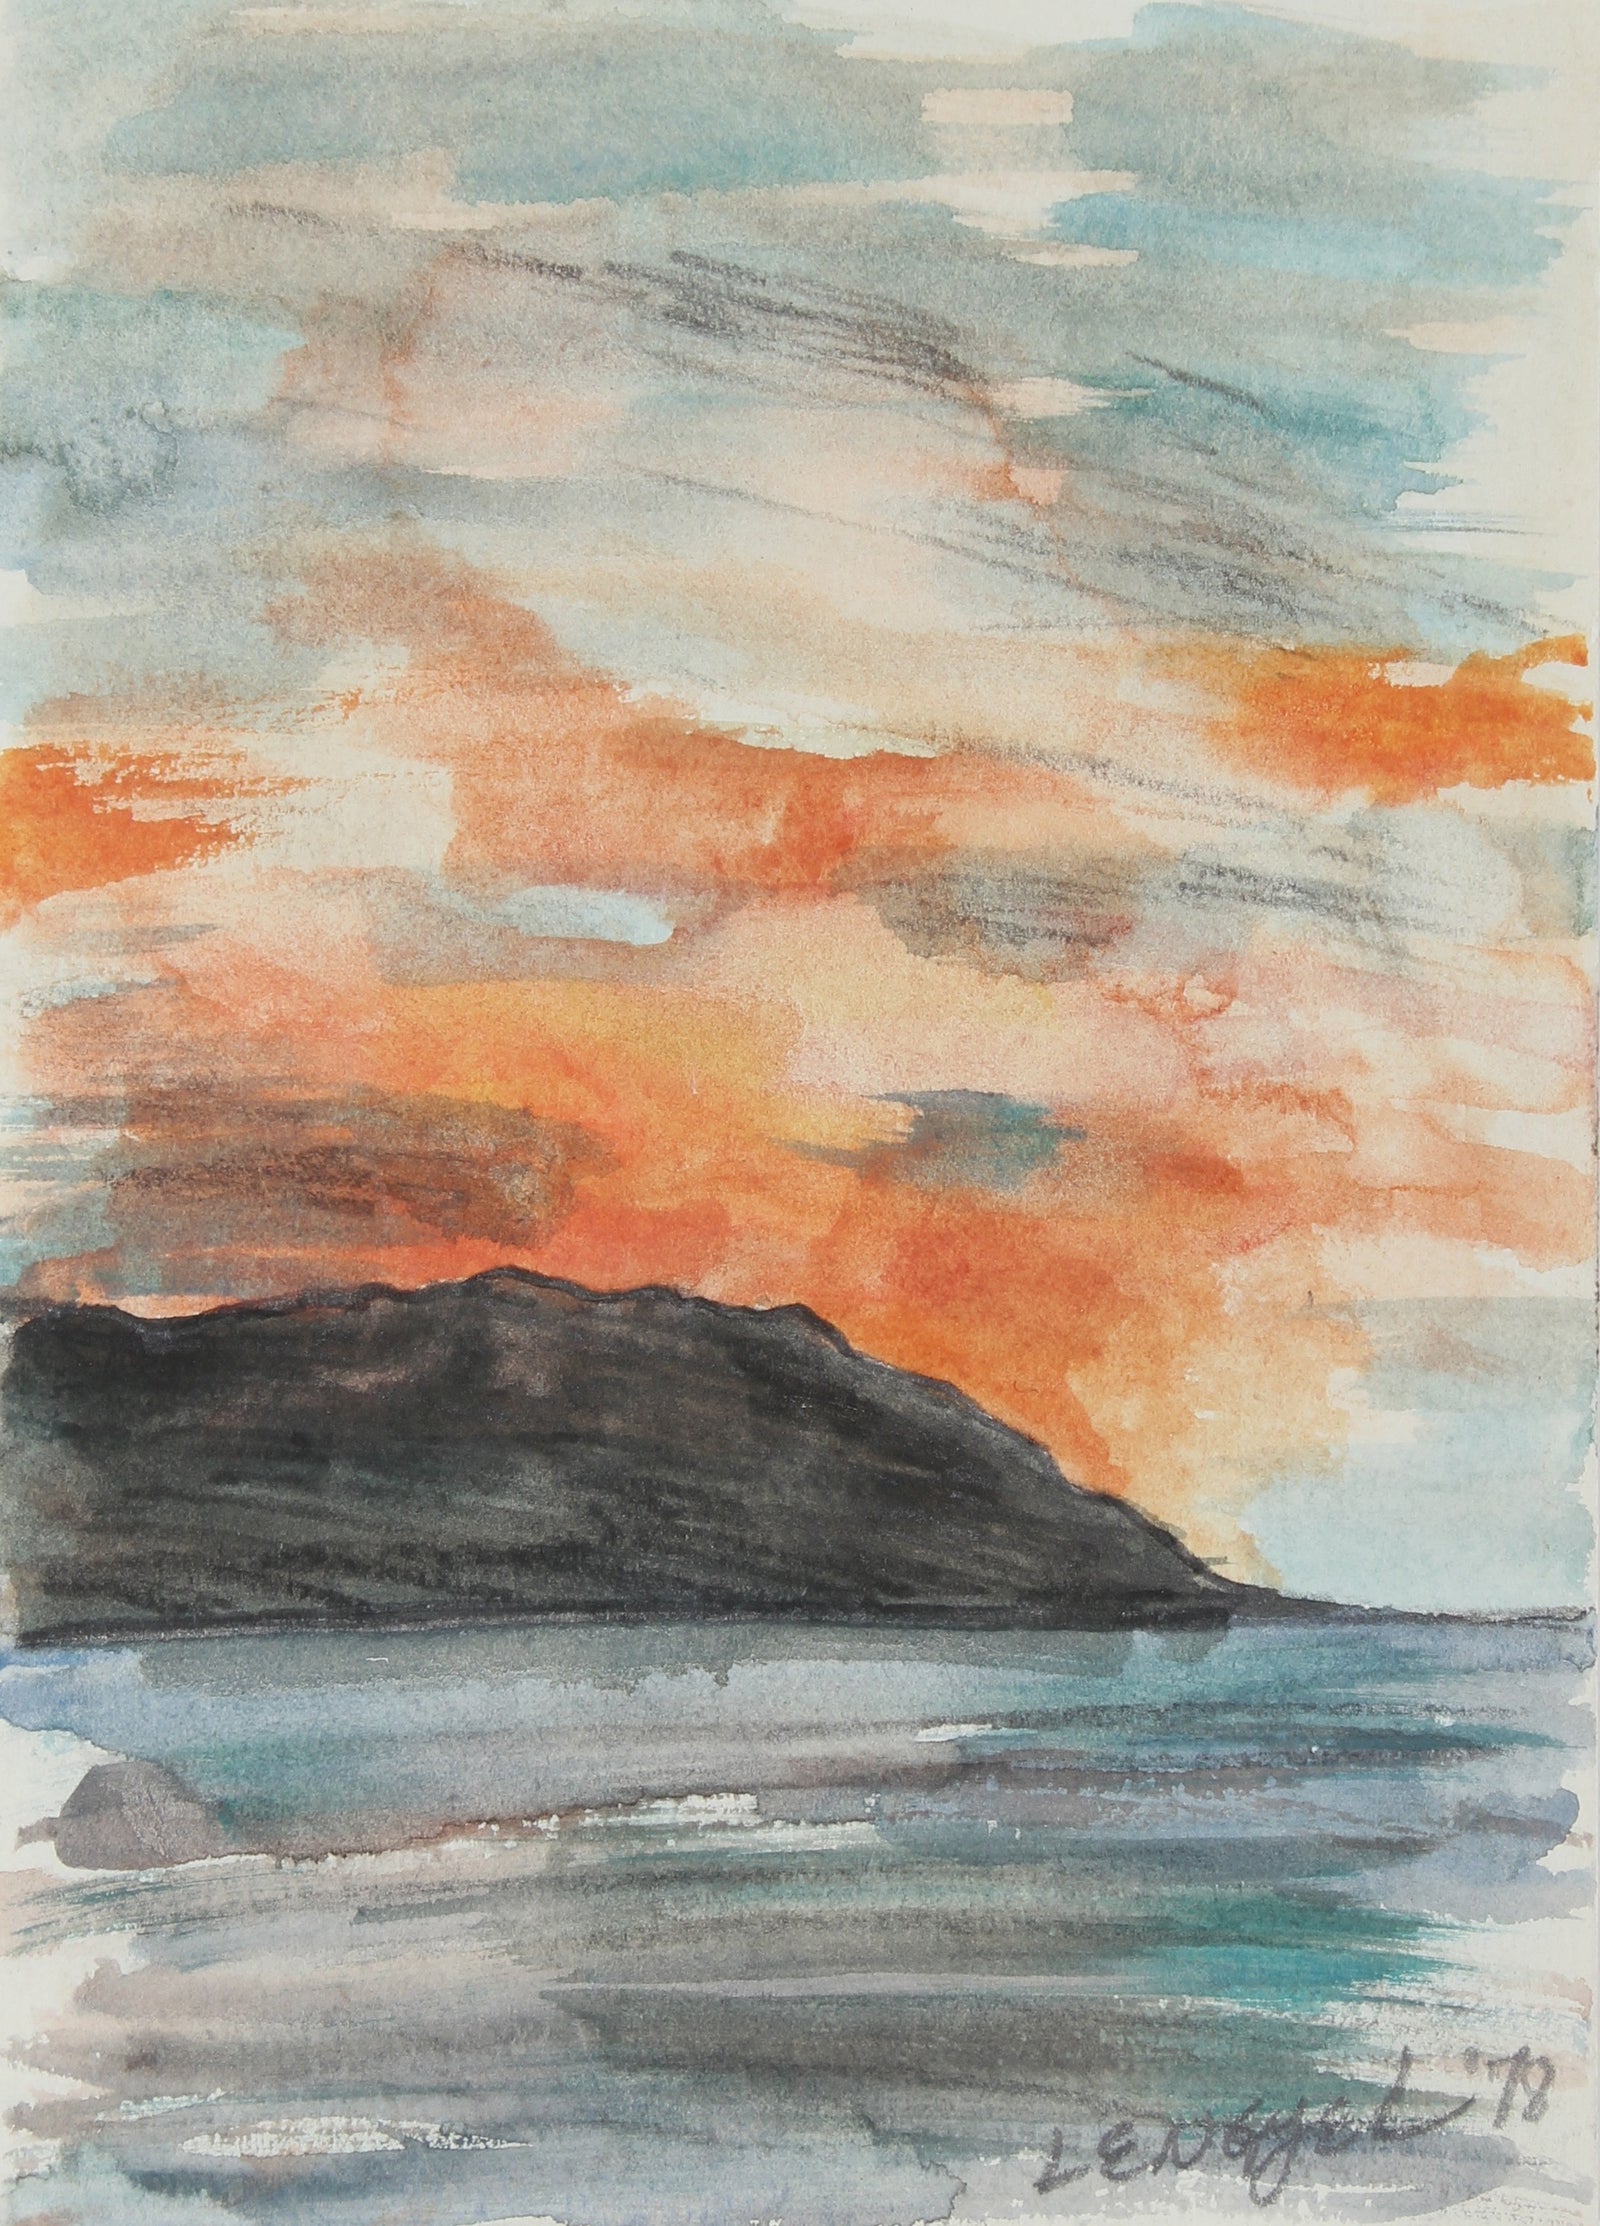 Abstracted Cabo San Lucas Sunset<br>1978 Watercolor & Graphite<br><br>#58610